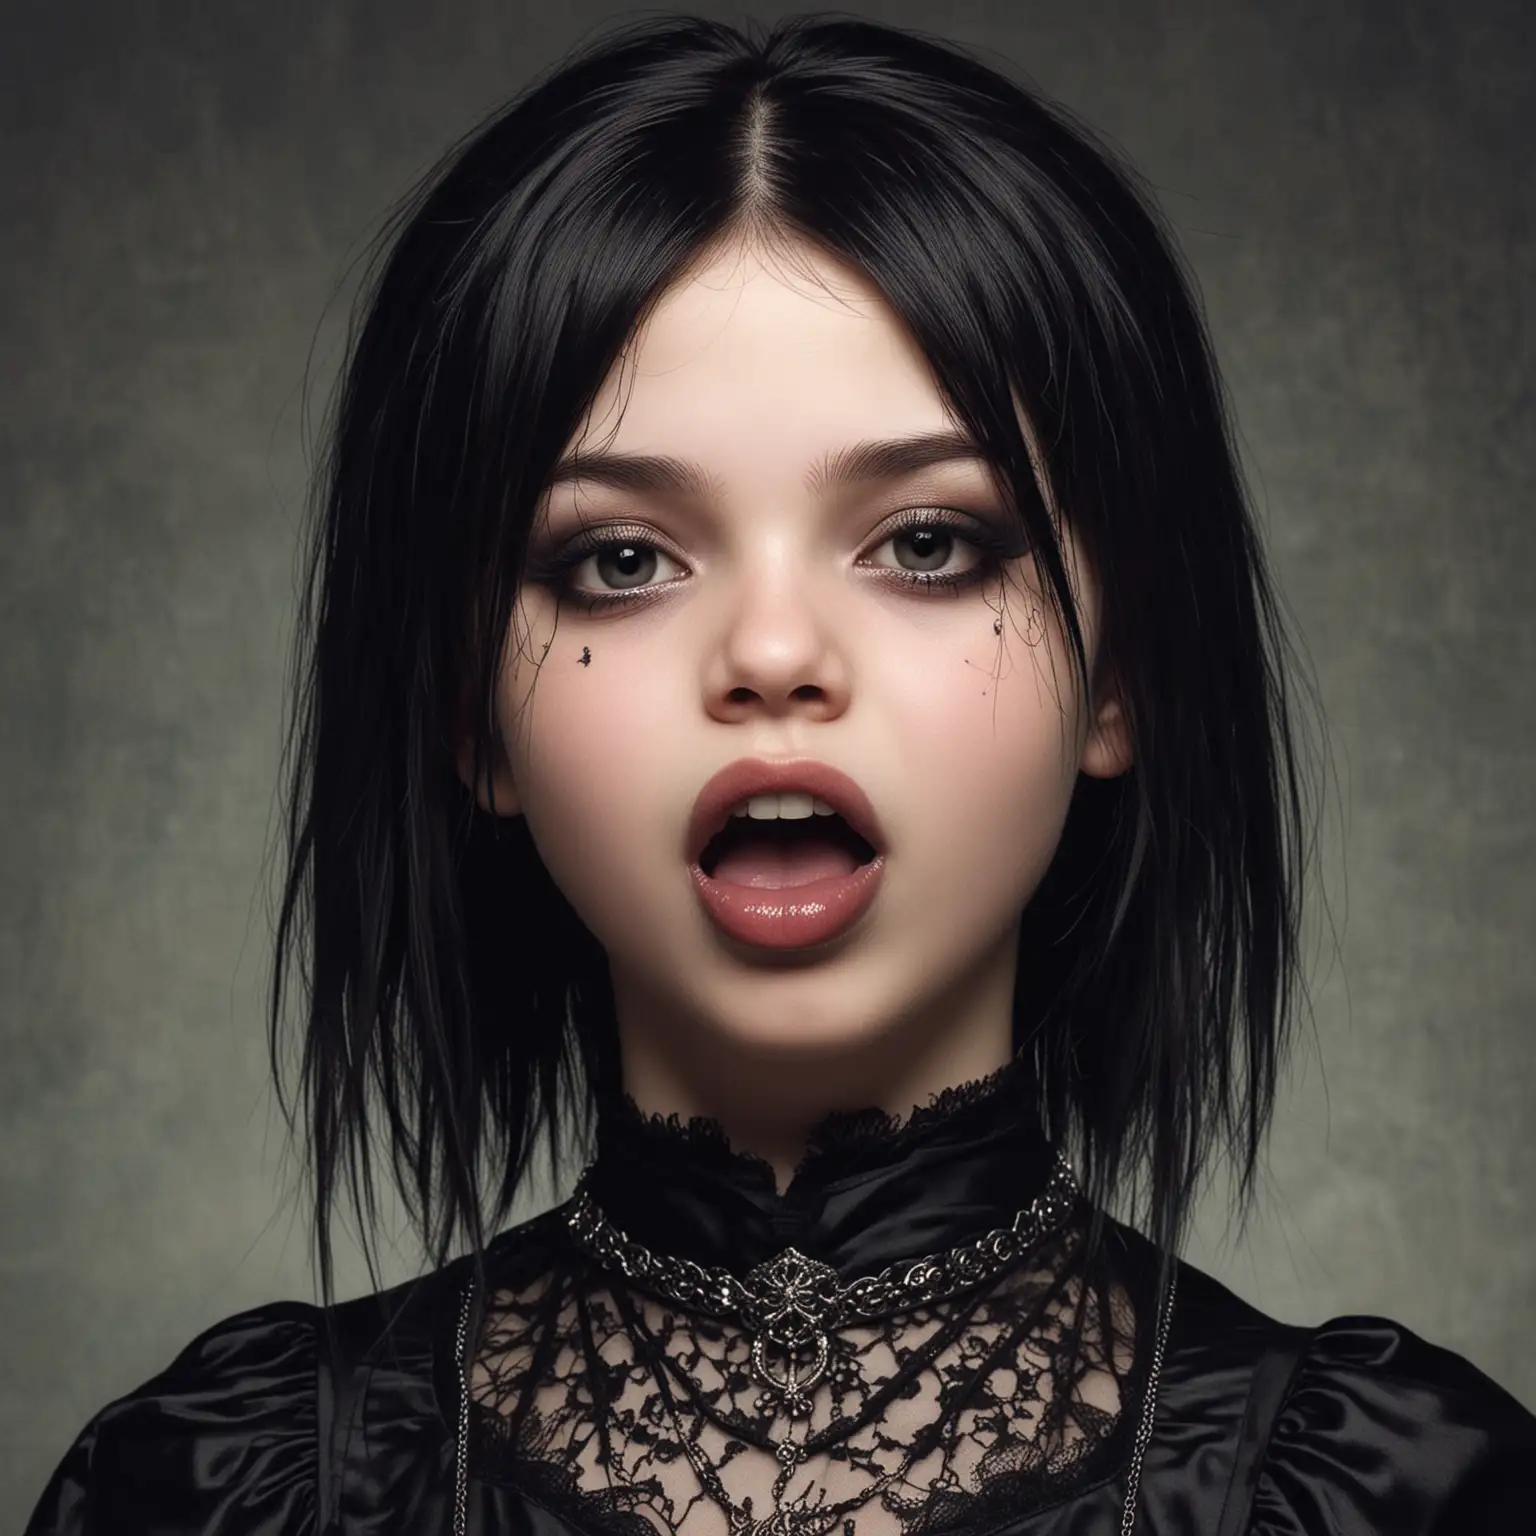 9-Year-Old-Goth-Princess-Profile-Portrait-with-Tongue-Out